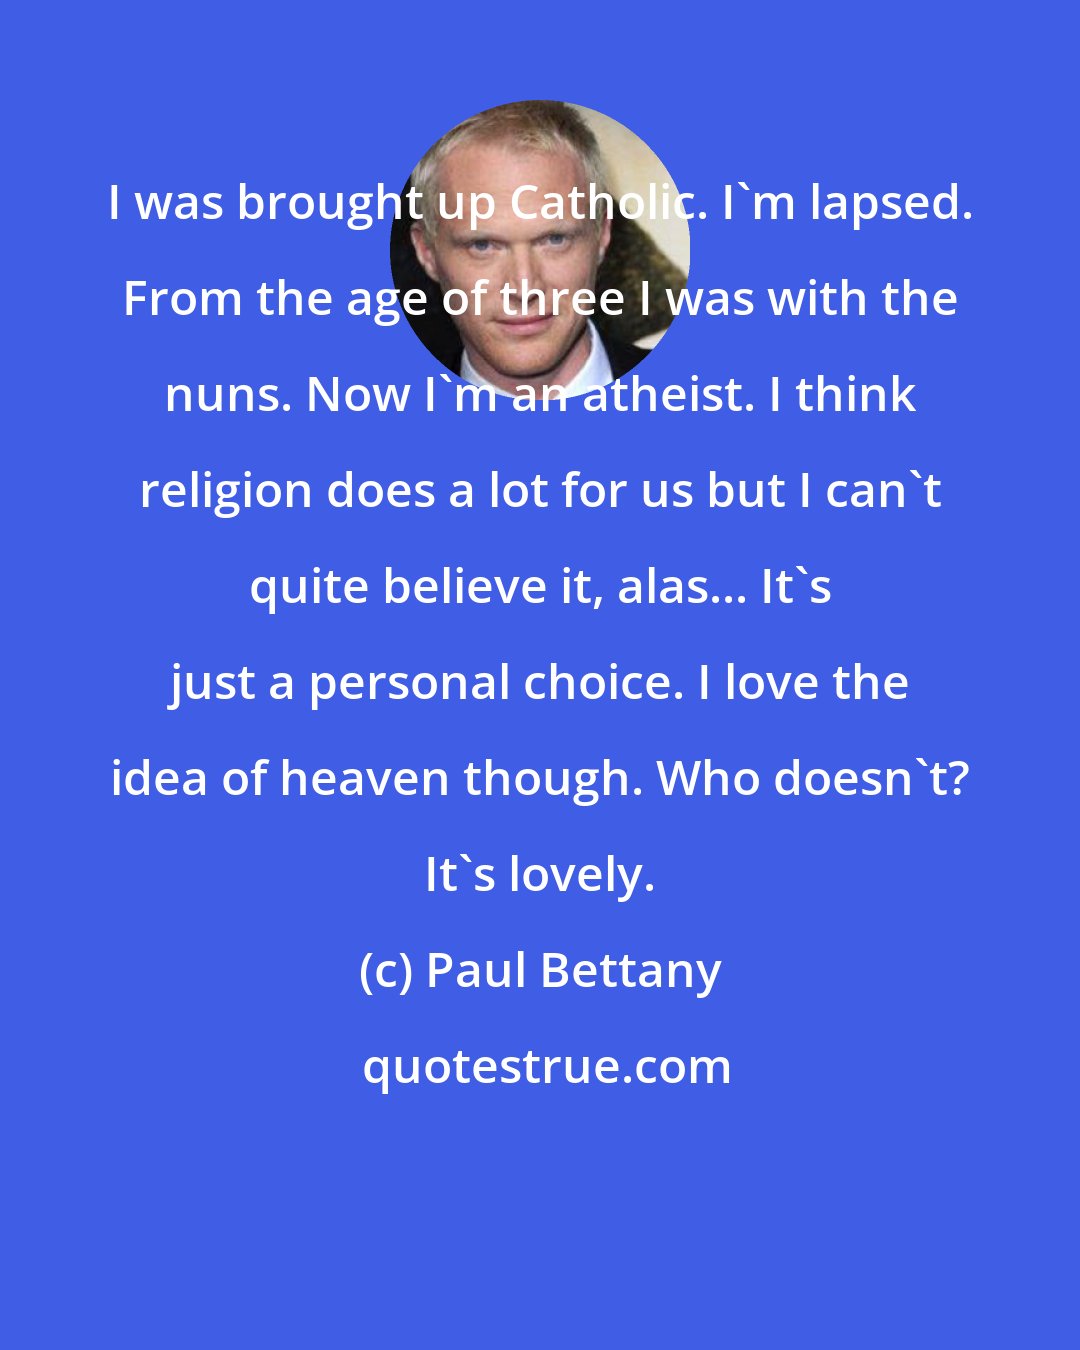 Paul Bettany: I was brought up Catholic. I'm lapsed. From the age of three I was with the nuns. Now I'm an atheist. I think religion does a lot for us but I can't quite believe it, alas... It's just a personal choice. I love the idea of heaven though. Who doesn't? It's lovely.